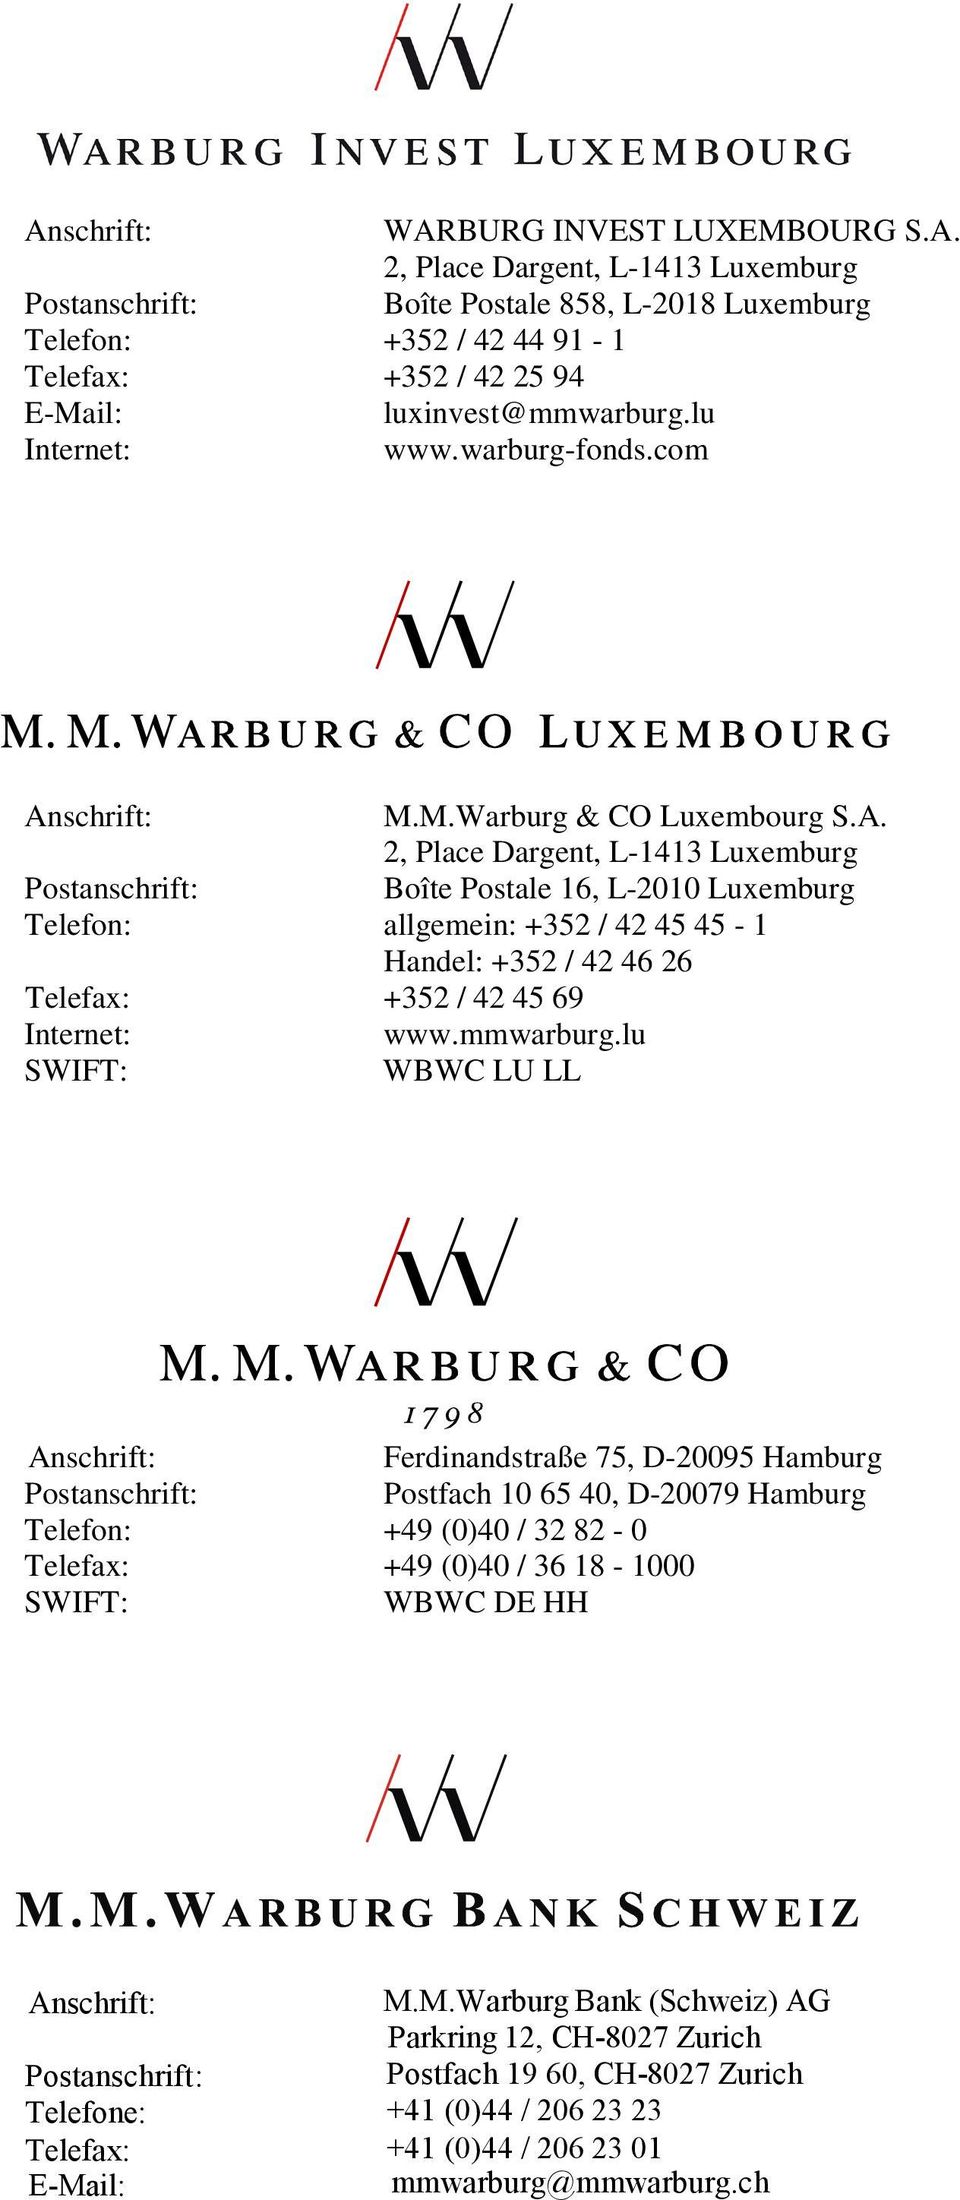 schrift: M.M.Warburg & CO Luxembourg S.A.